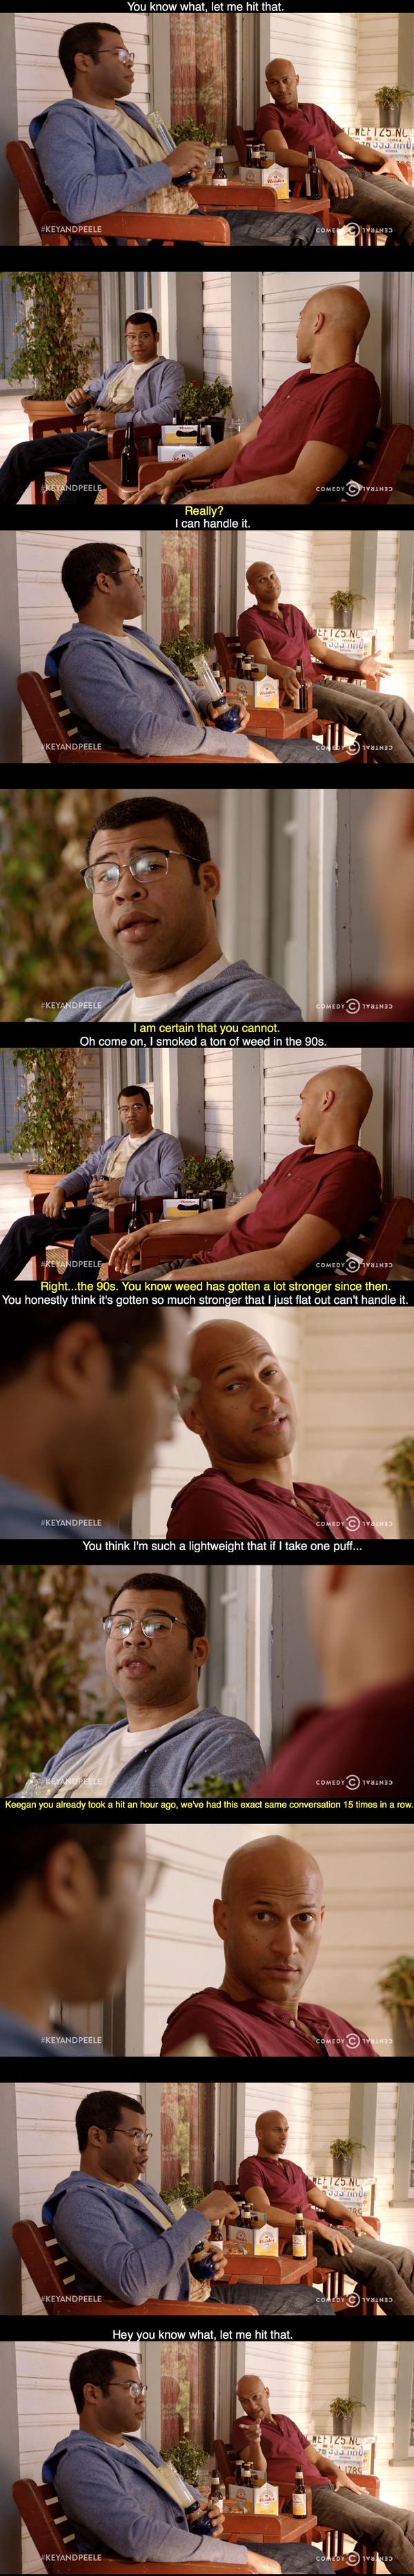 key and peele, smoking from a bong, let me hit that